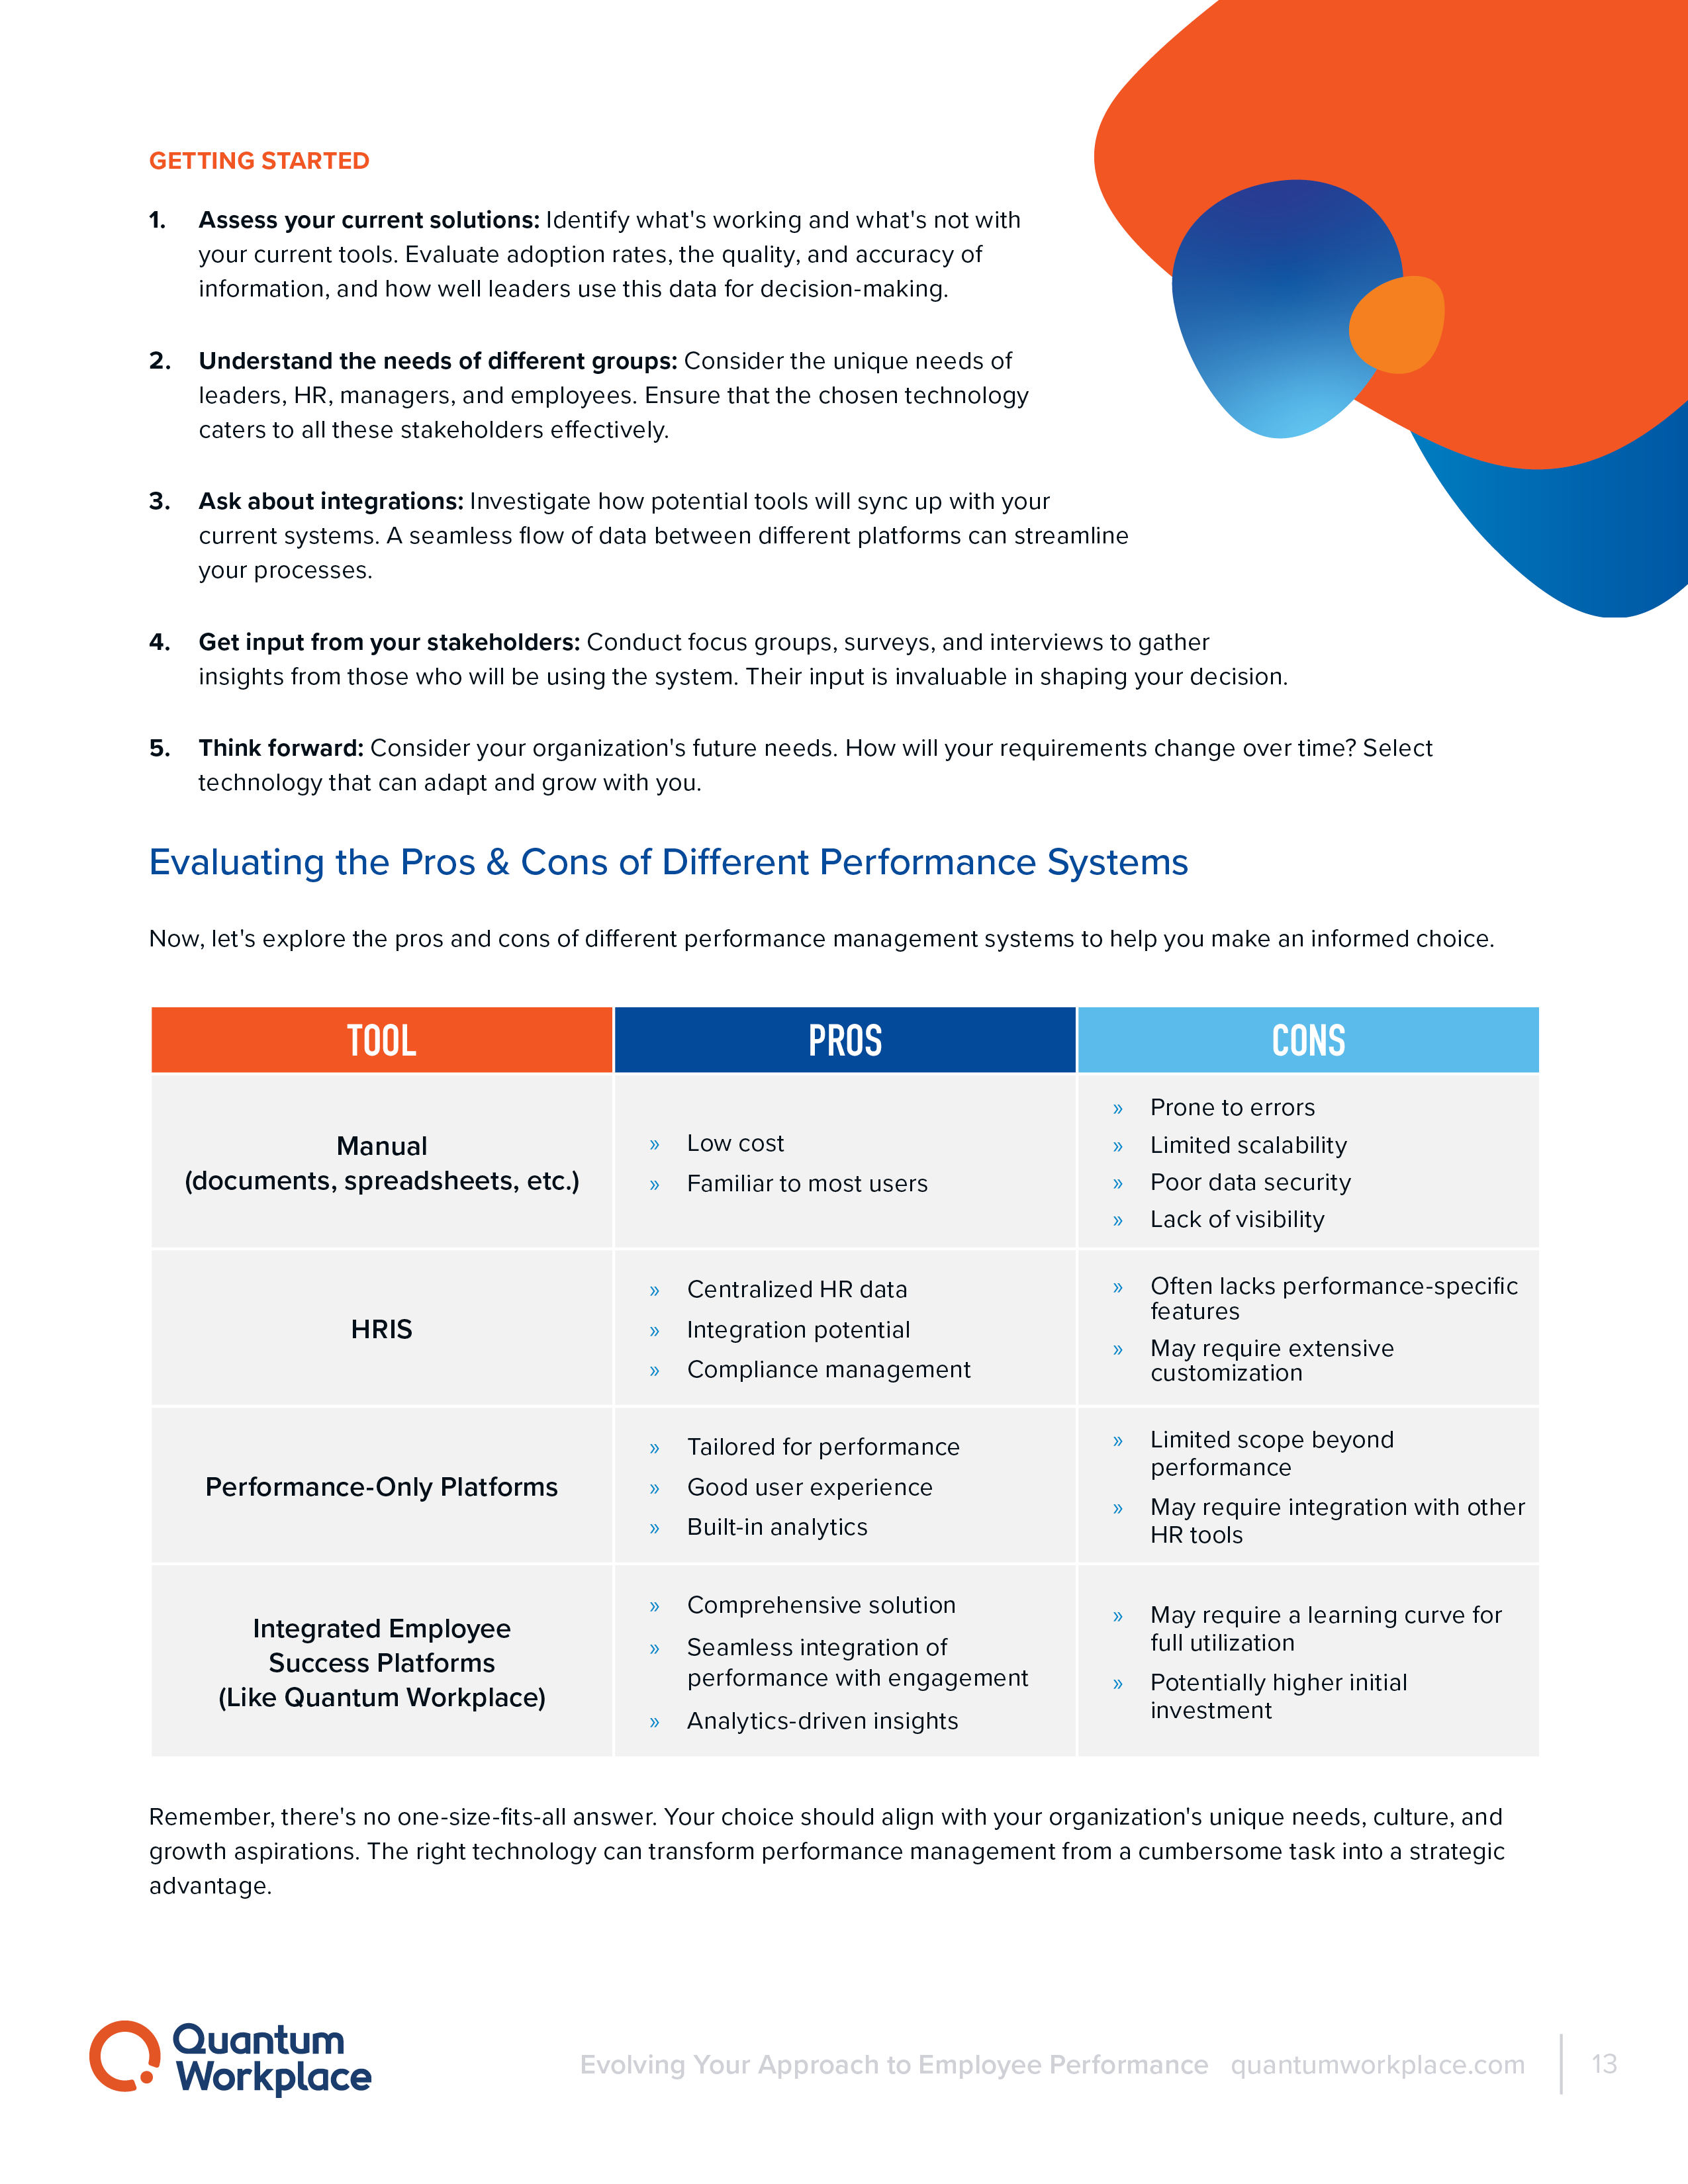 Quantum-Evolving-Your-Approach-to-Employee-Performance13